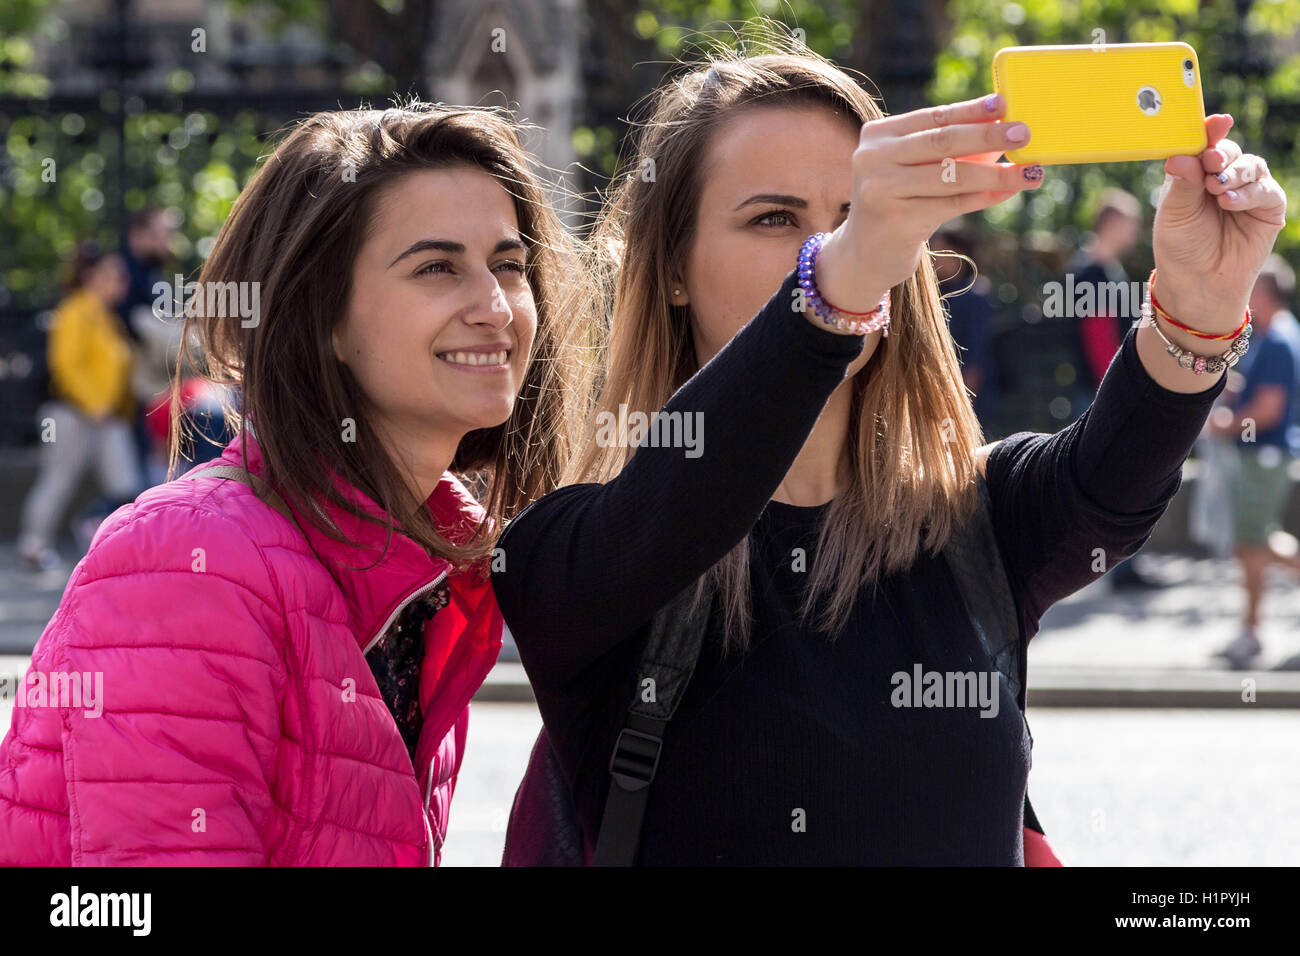 Tourists taking photos and phone selfies in Westminster, London, UK. Stock Photo